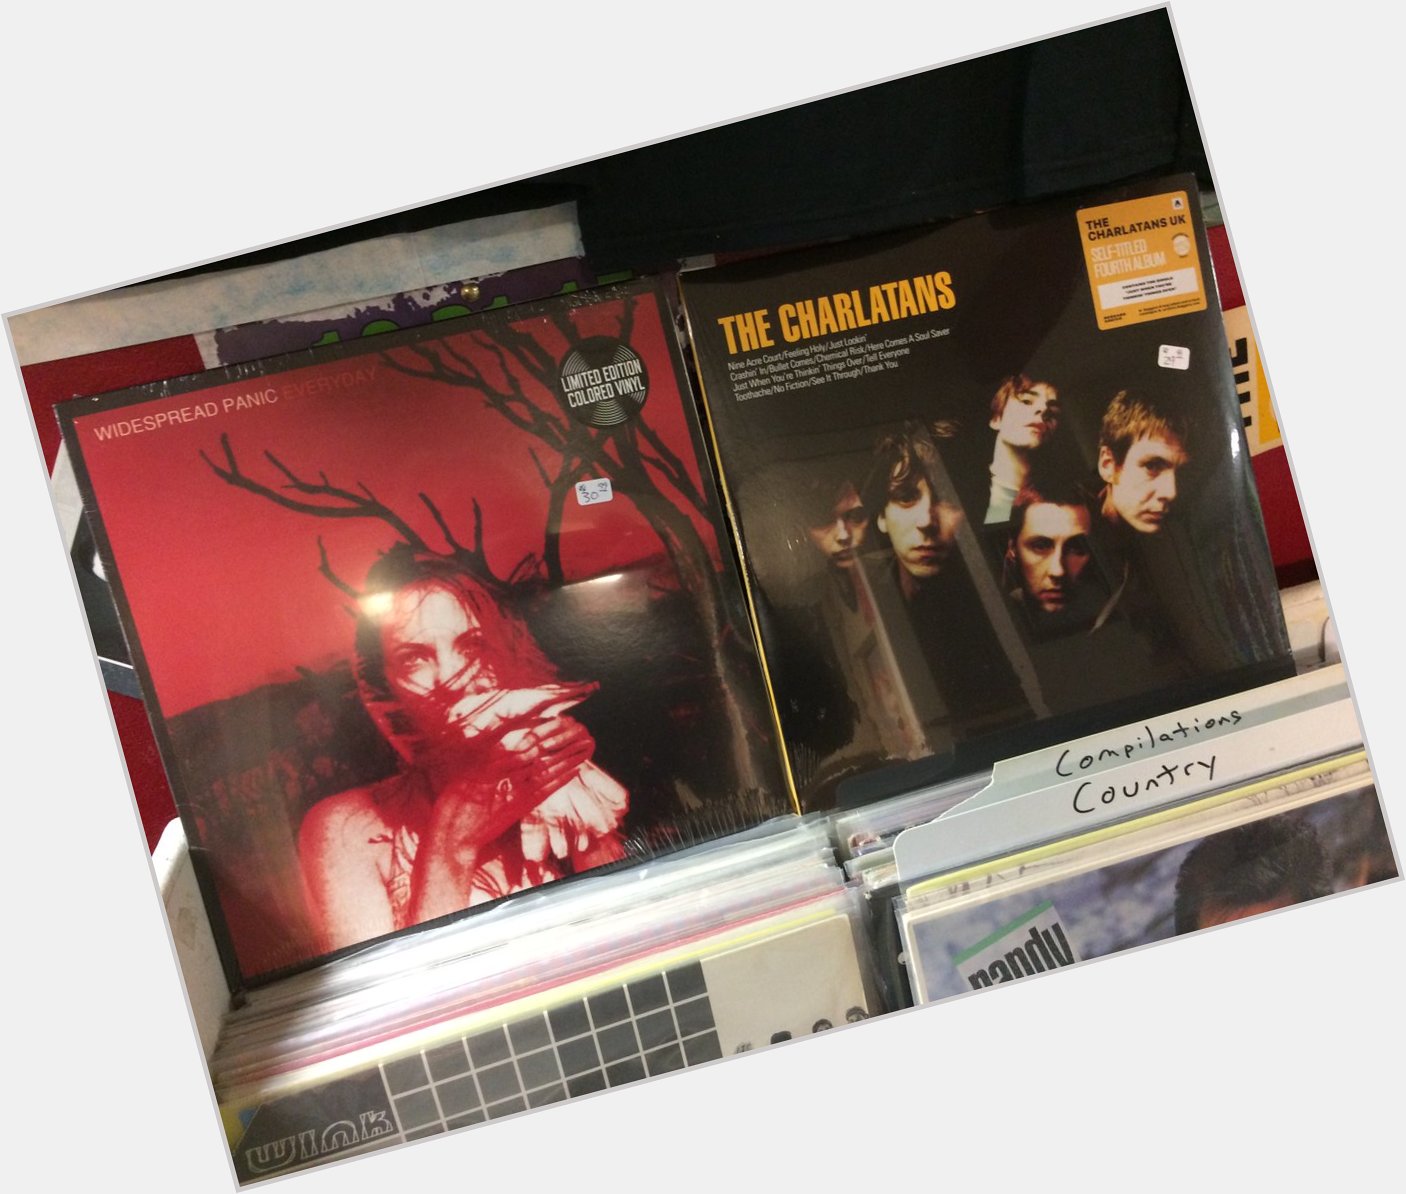 Happy Birthday to Dave Schools of Widespread Panic & Martin Blunt of The Charlatans 